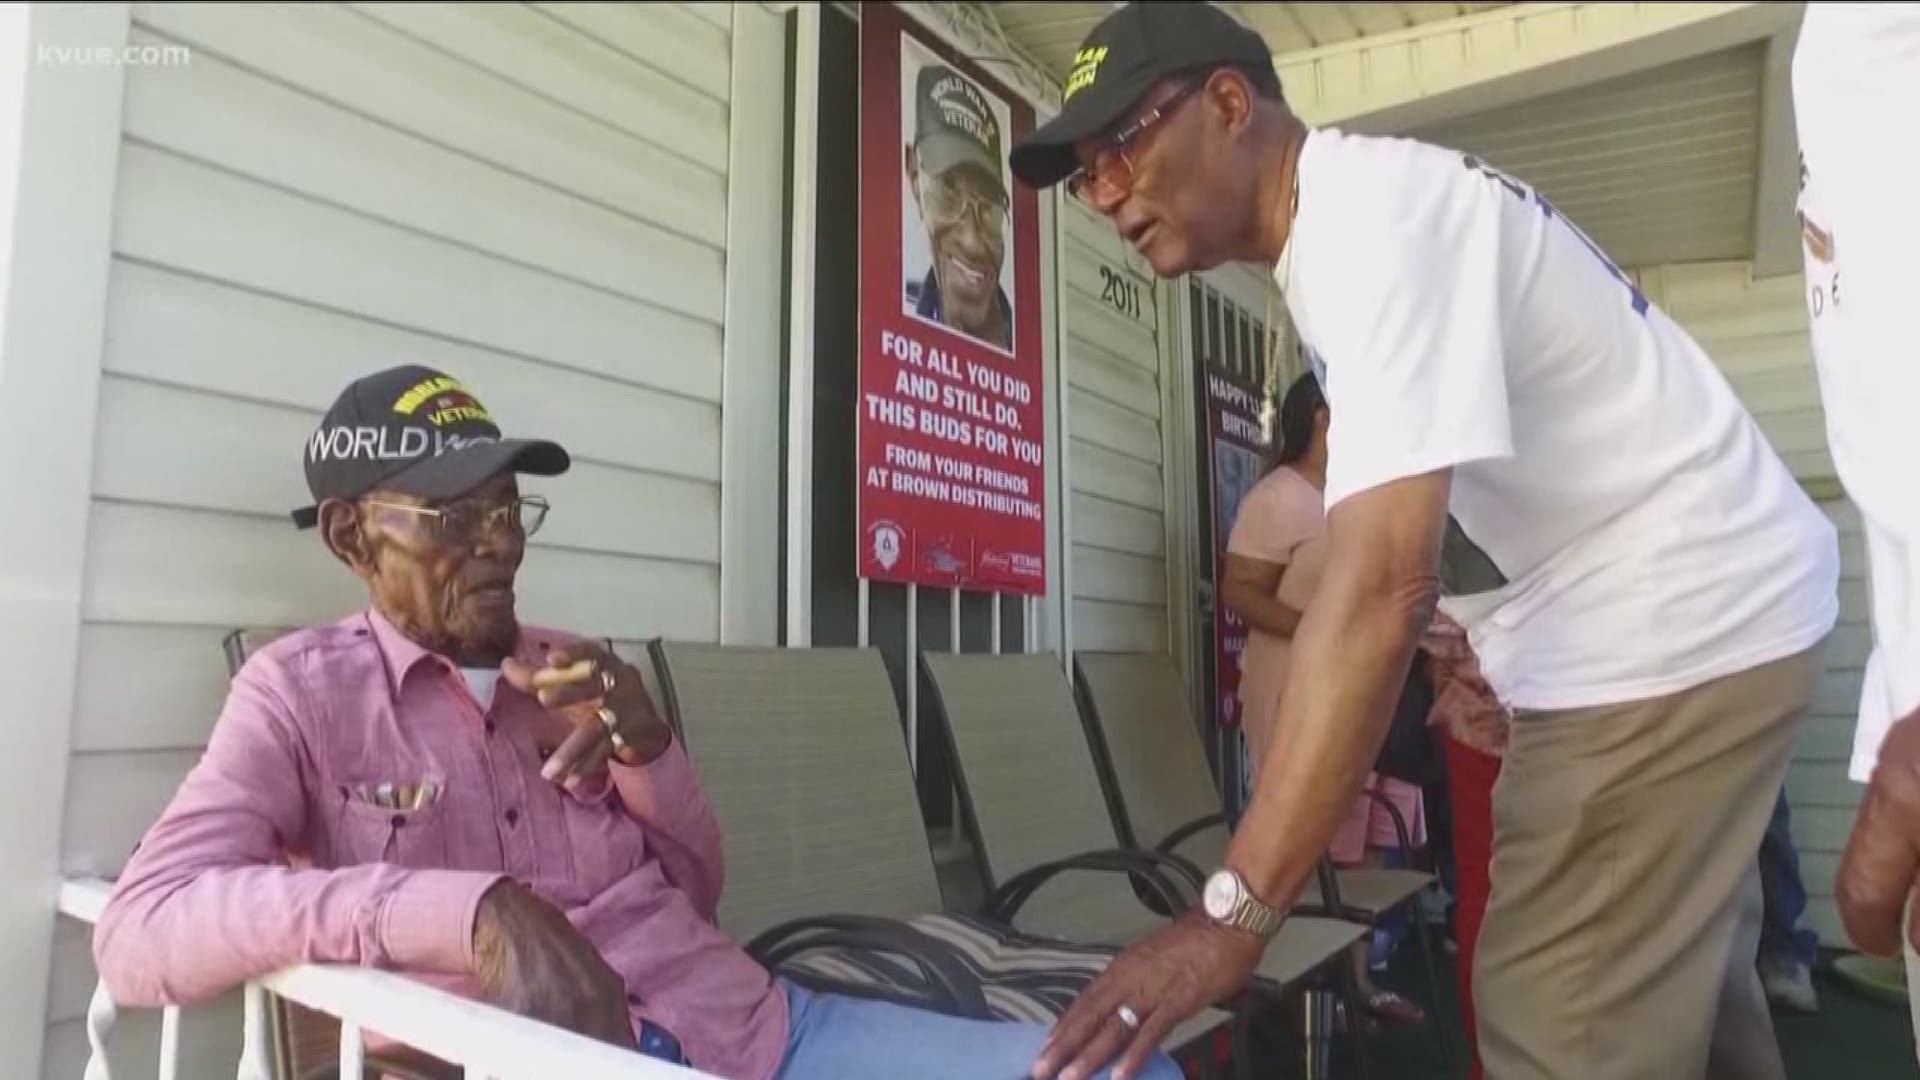 Richard Overton was known across the world, but he was one of us.